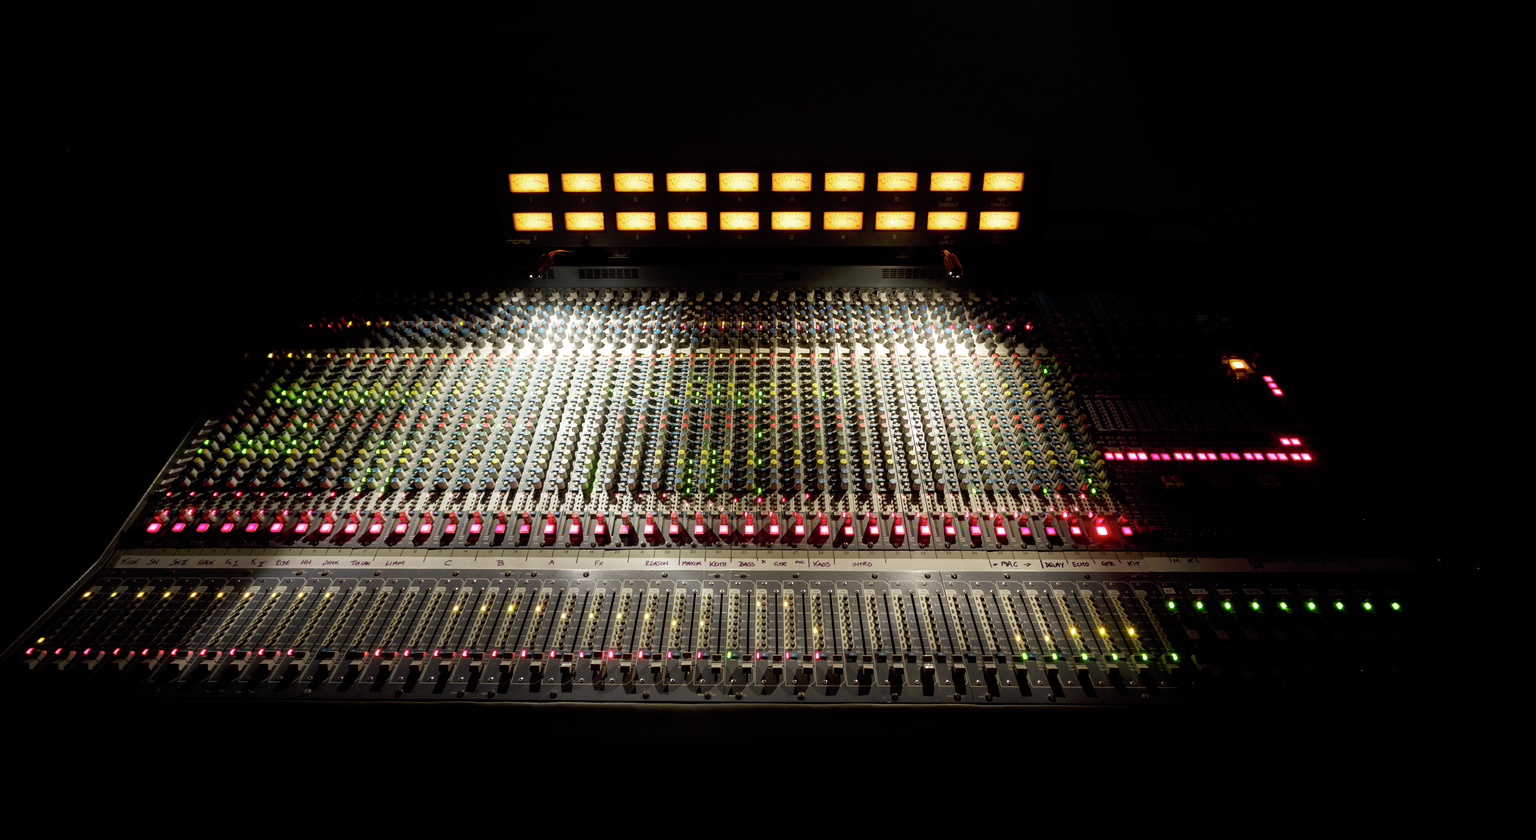 Midas XL3 Live Performance Console, now part of the Science Museum Group Collection